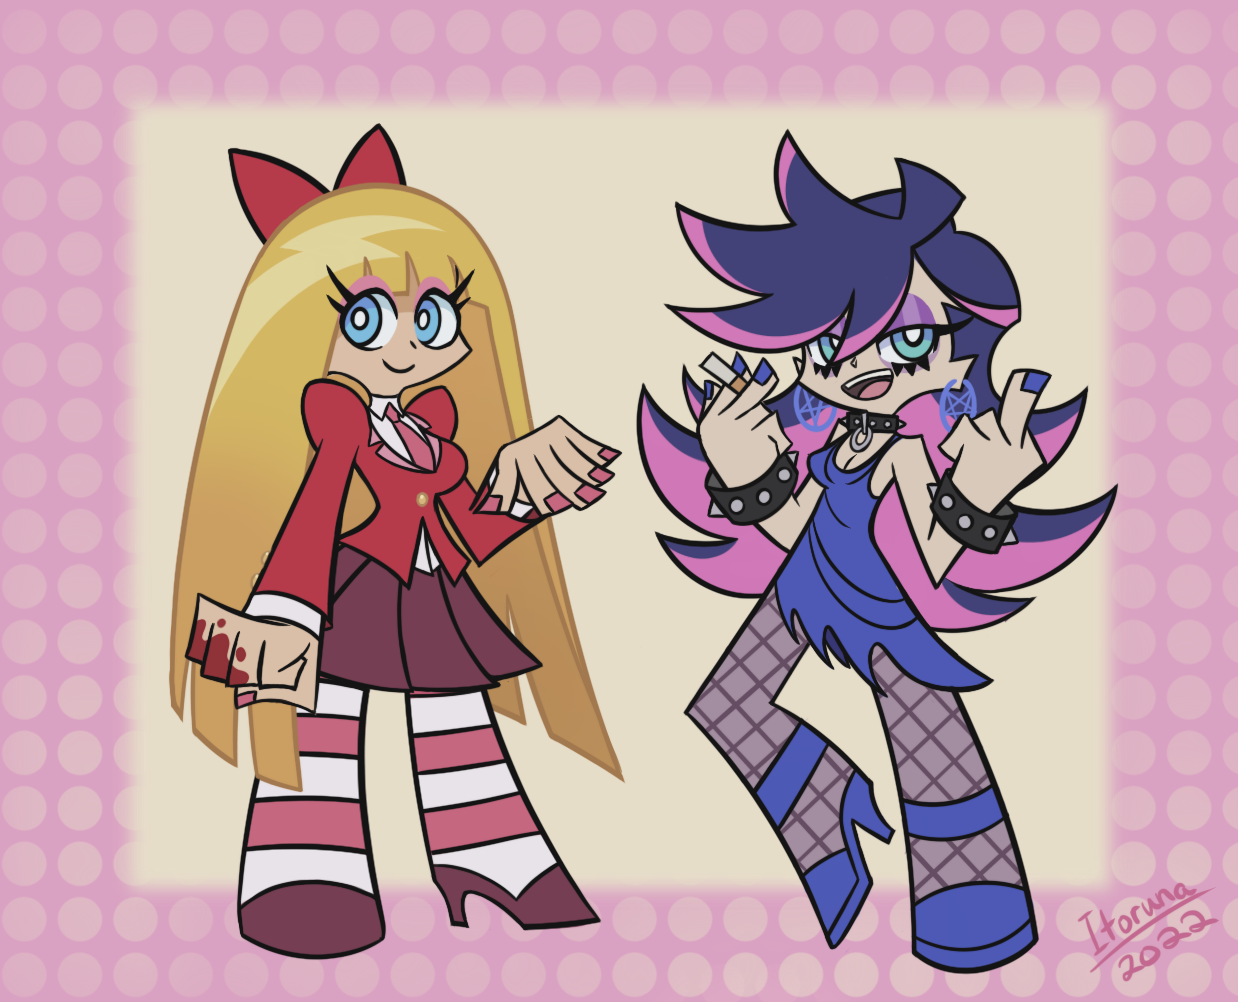 Roleswap Panty and Stocking by Itoruna-The-Platypus on DeviantArt